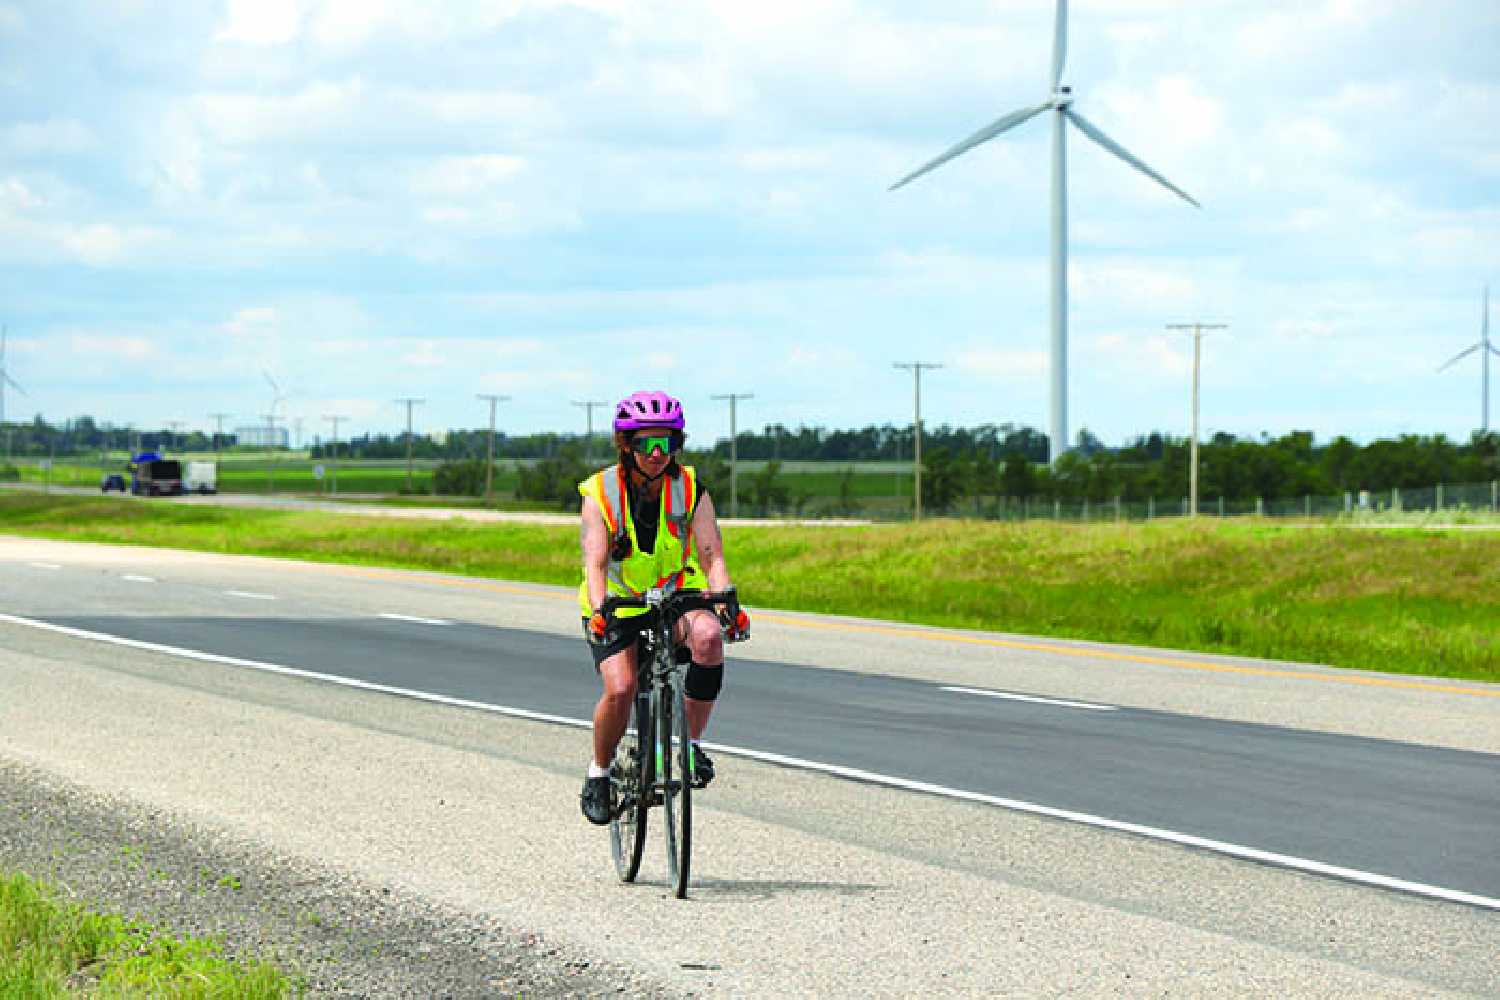 Jade Dulle cycles through the Moosomin area on her ride across Canada to raise awareness of mental health issues.